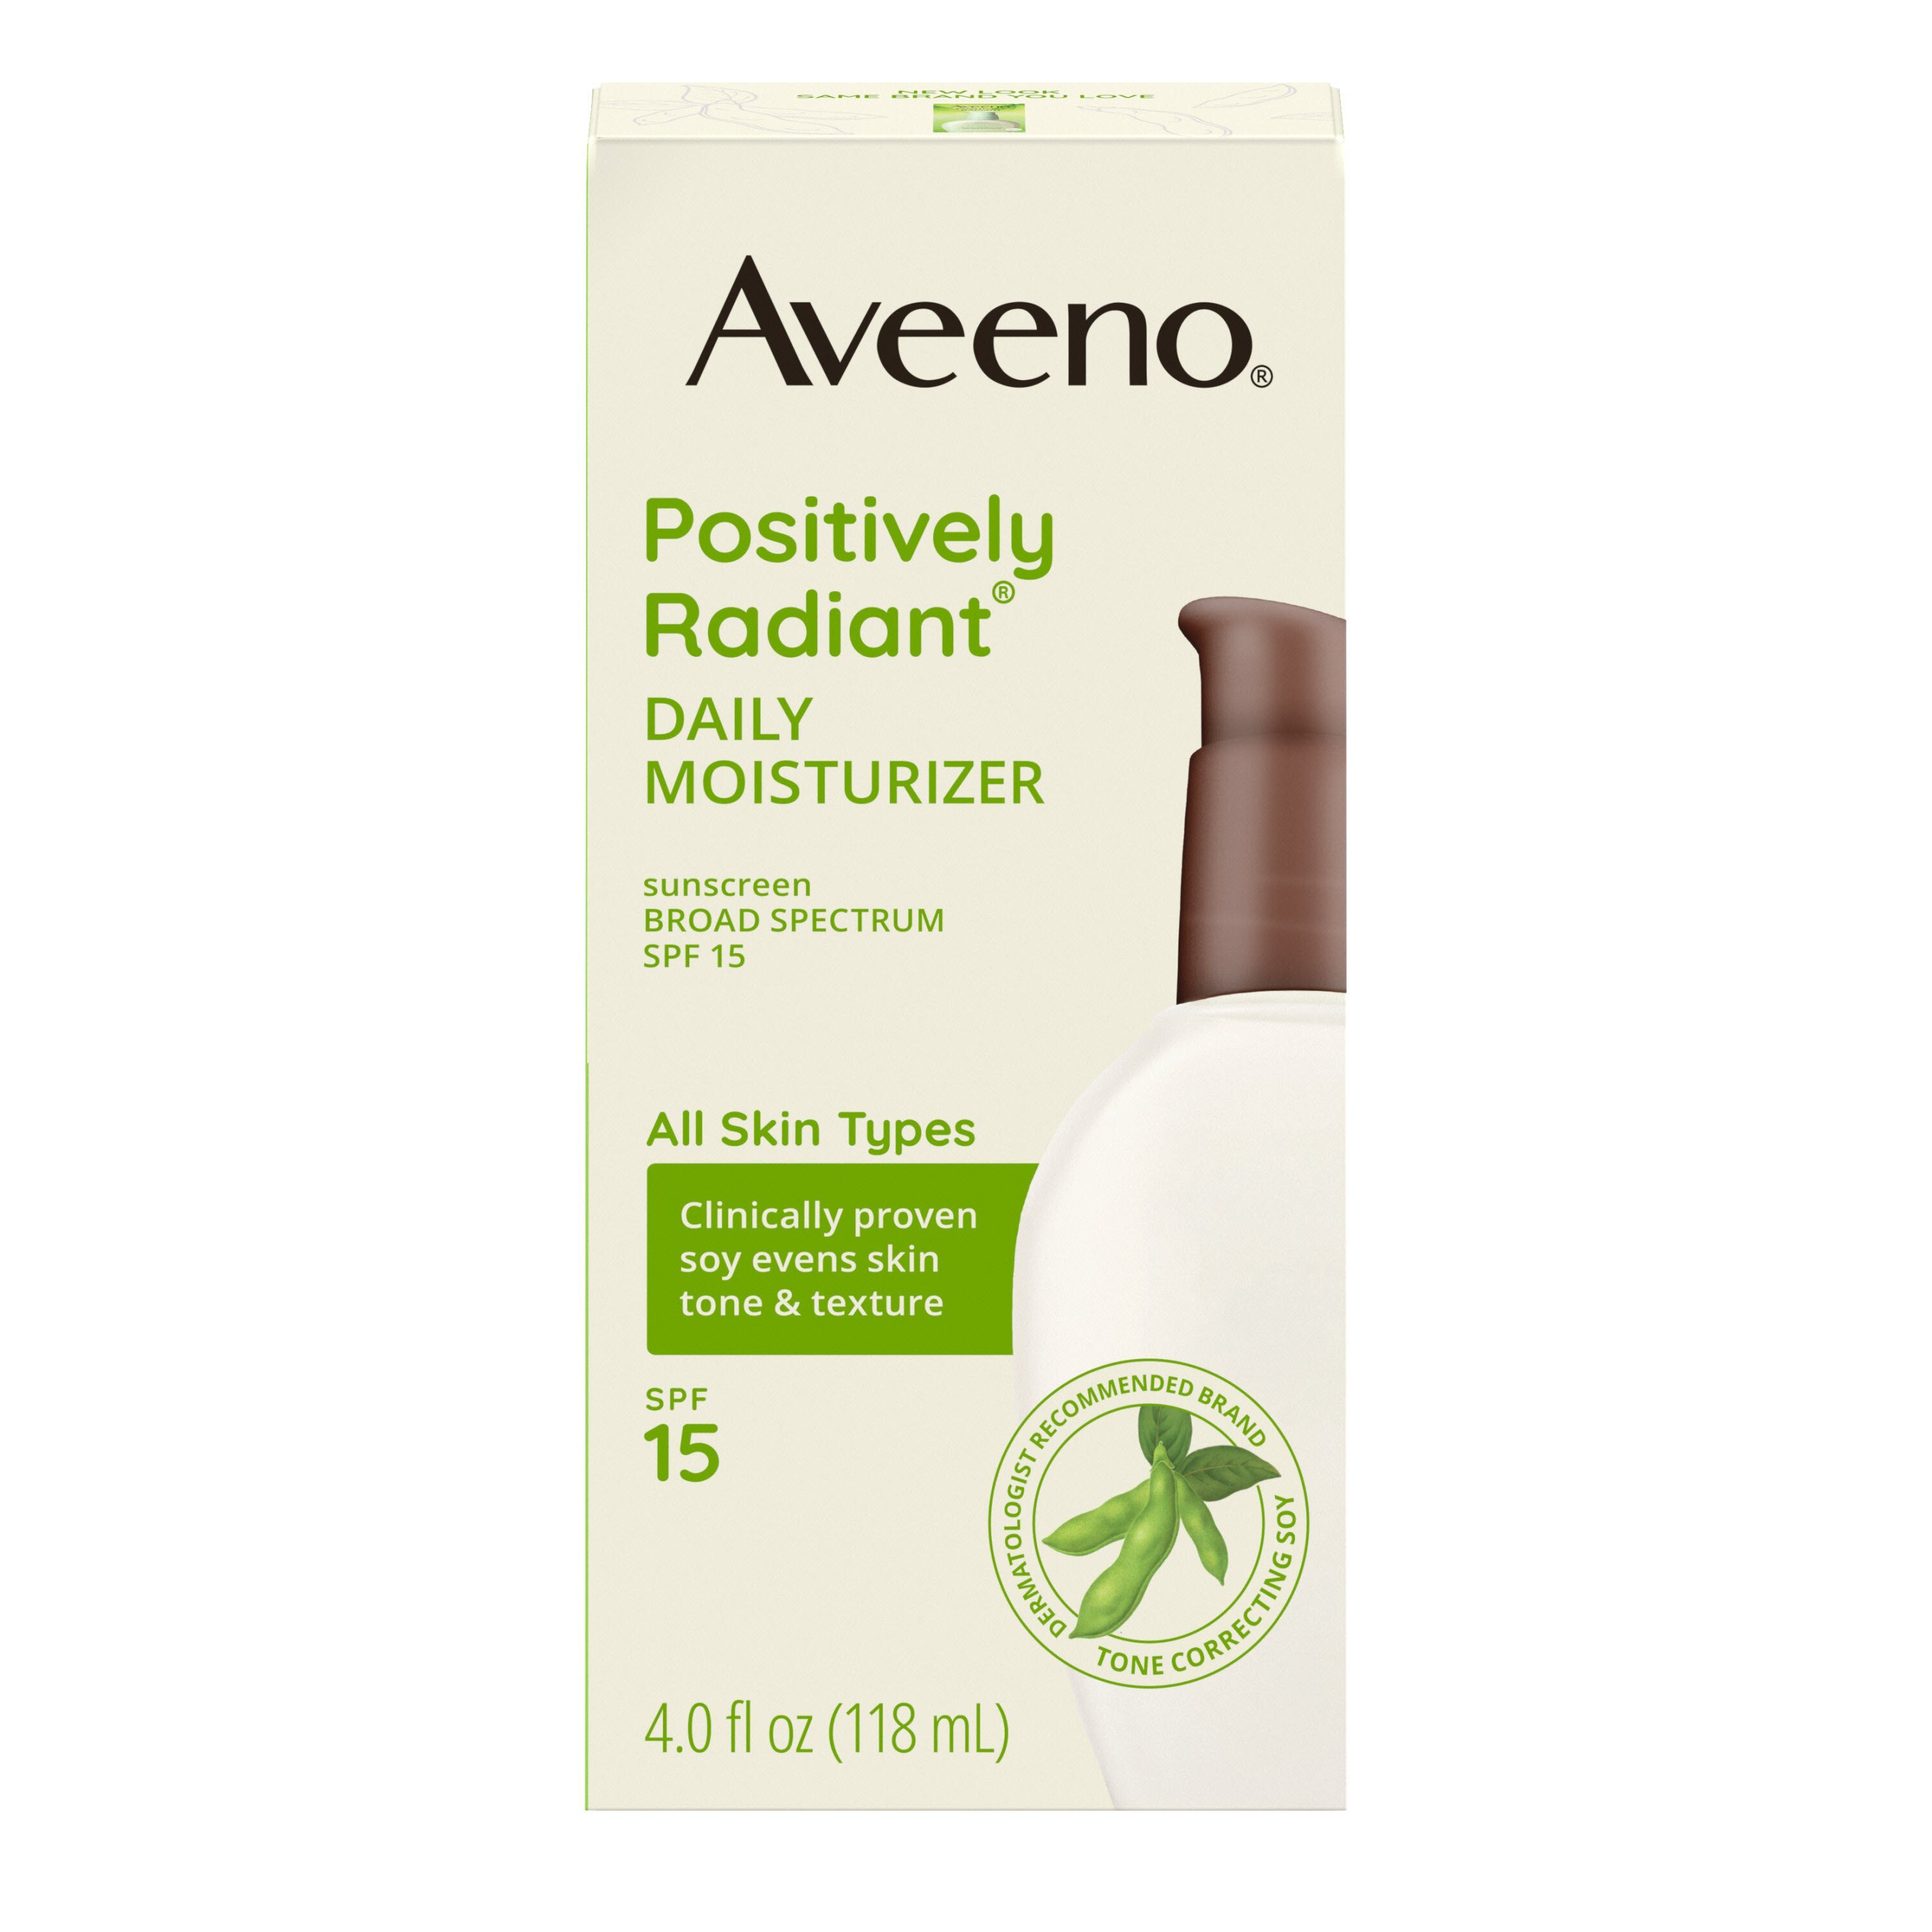 AVEENO Active Naturals Positively Radiant Daily Moisturizer SPF 15 4 oz - image 1 of 5